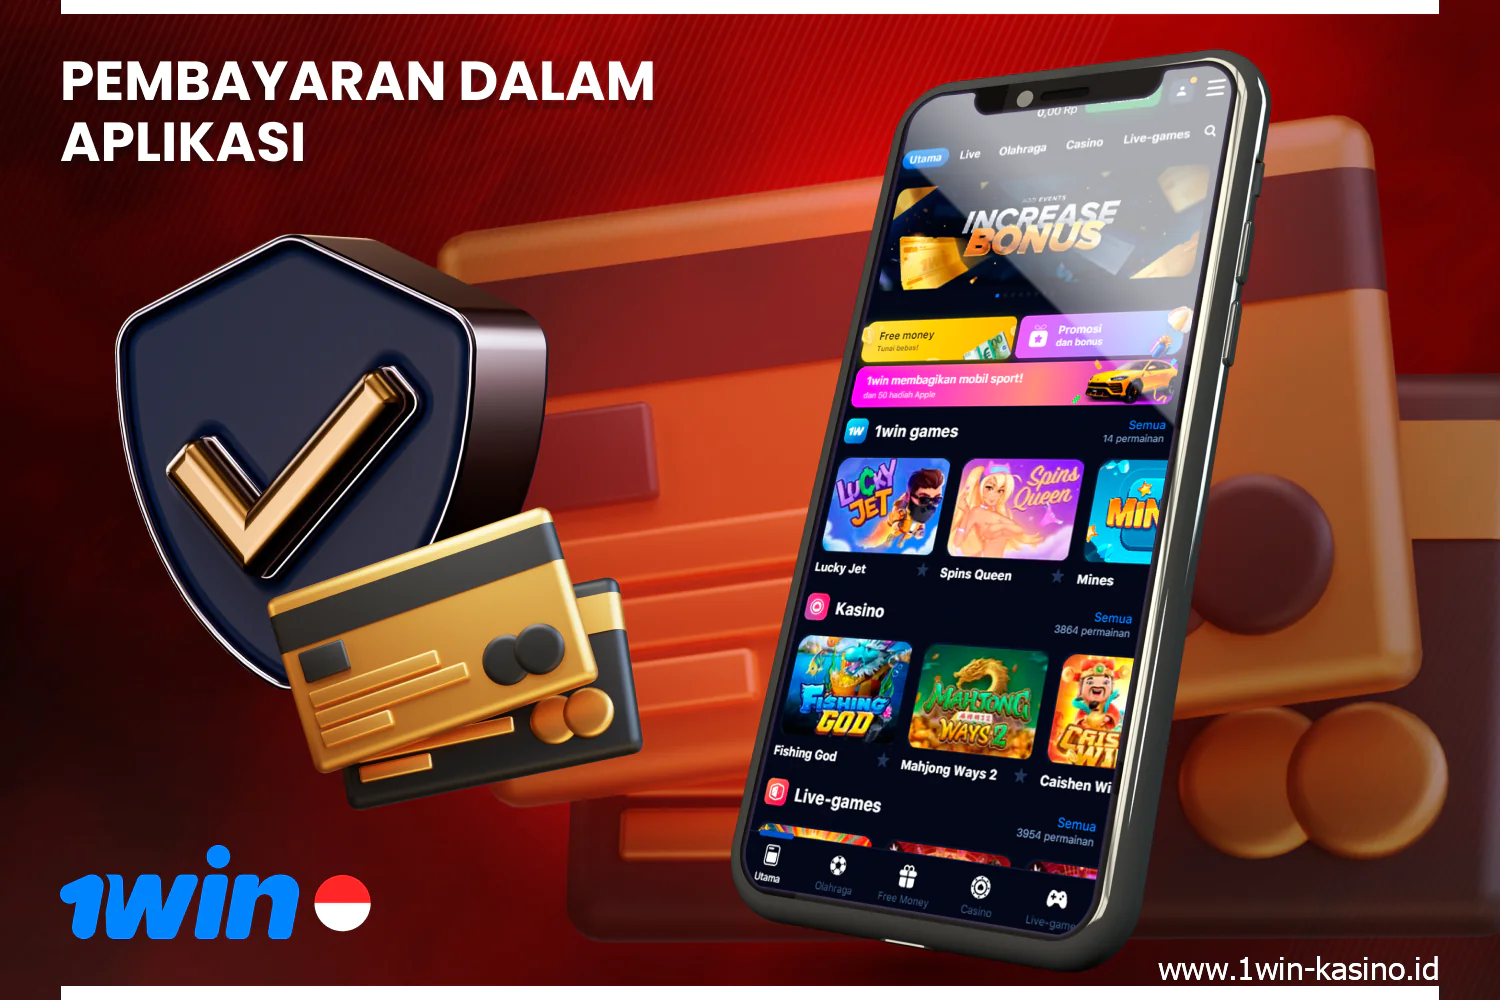 The 1win Android and iOS apps provide several payment methods to accommodate the needs of Indonesian players